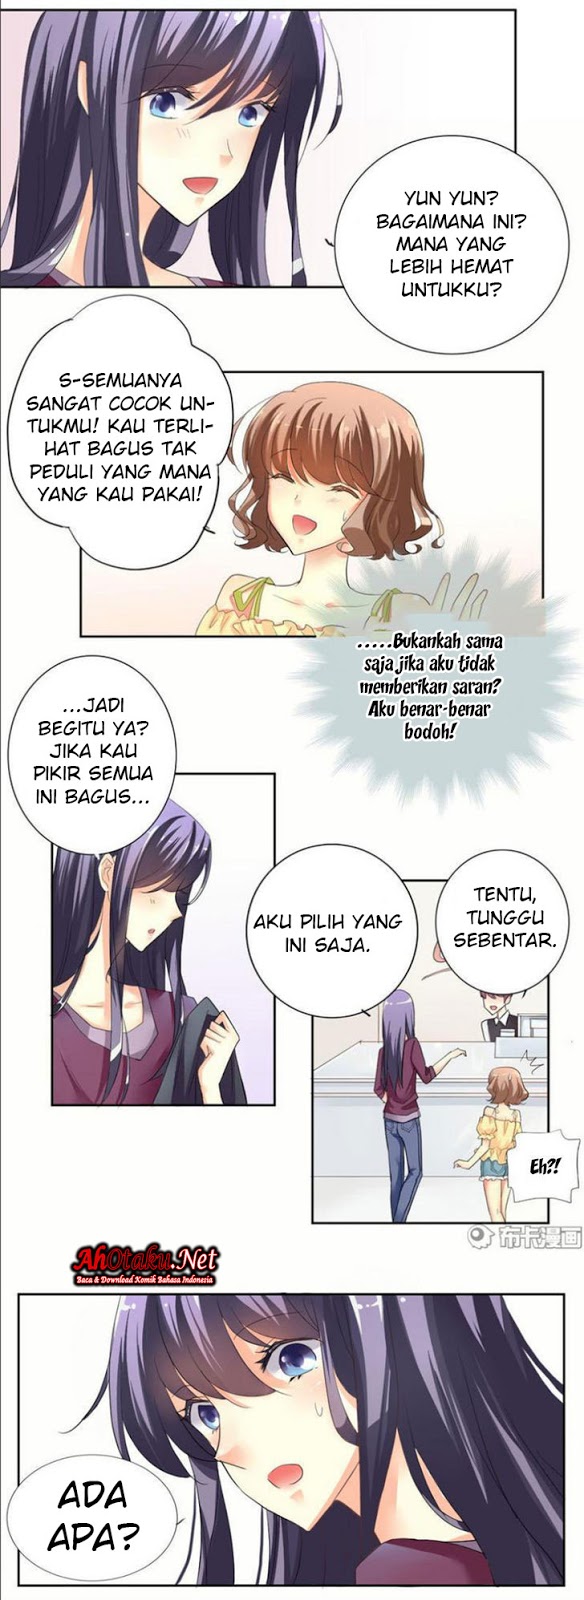 She Who’s Most Special To Me Chapter 02